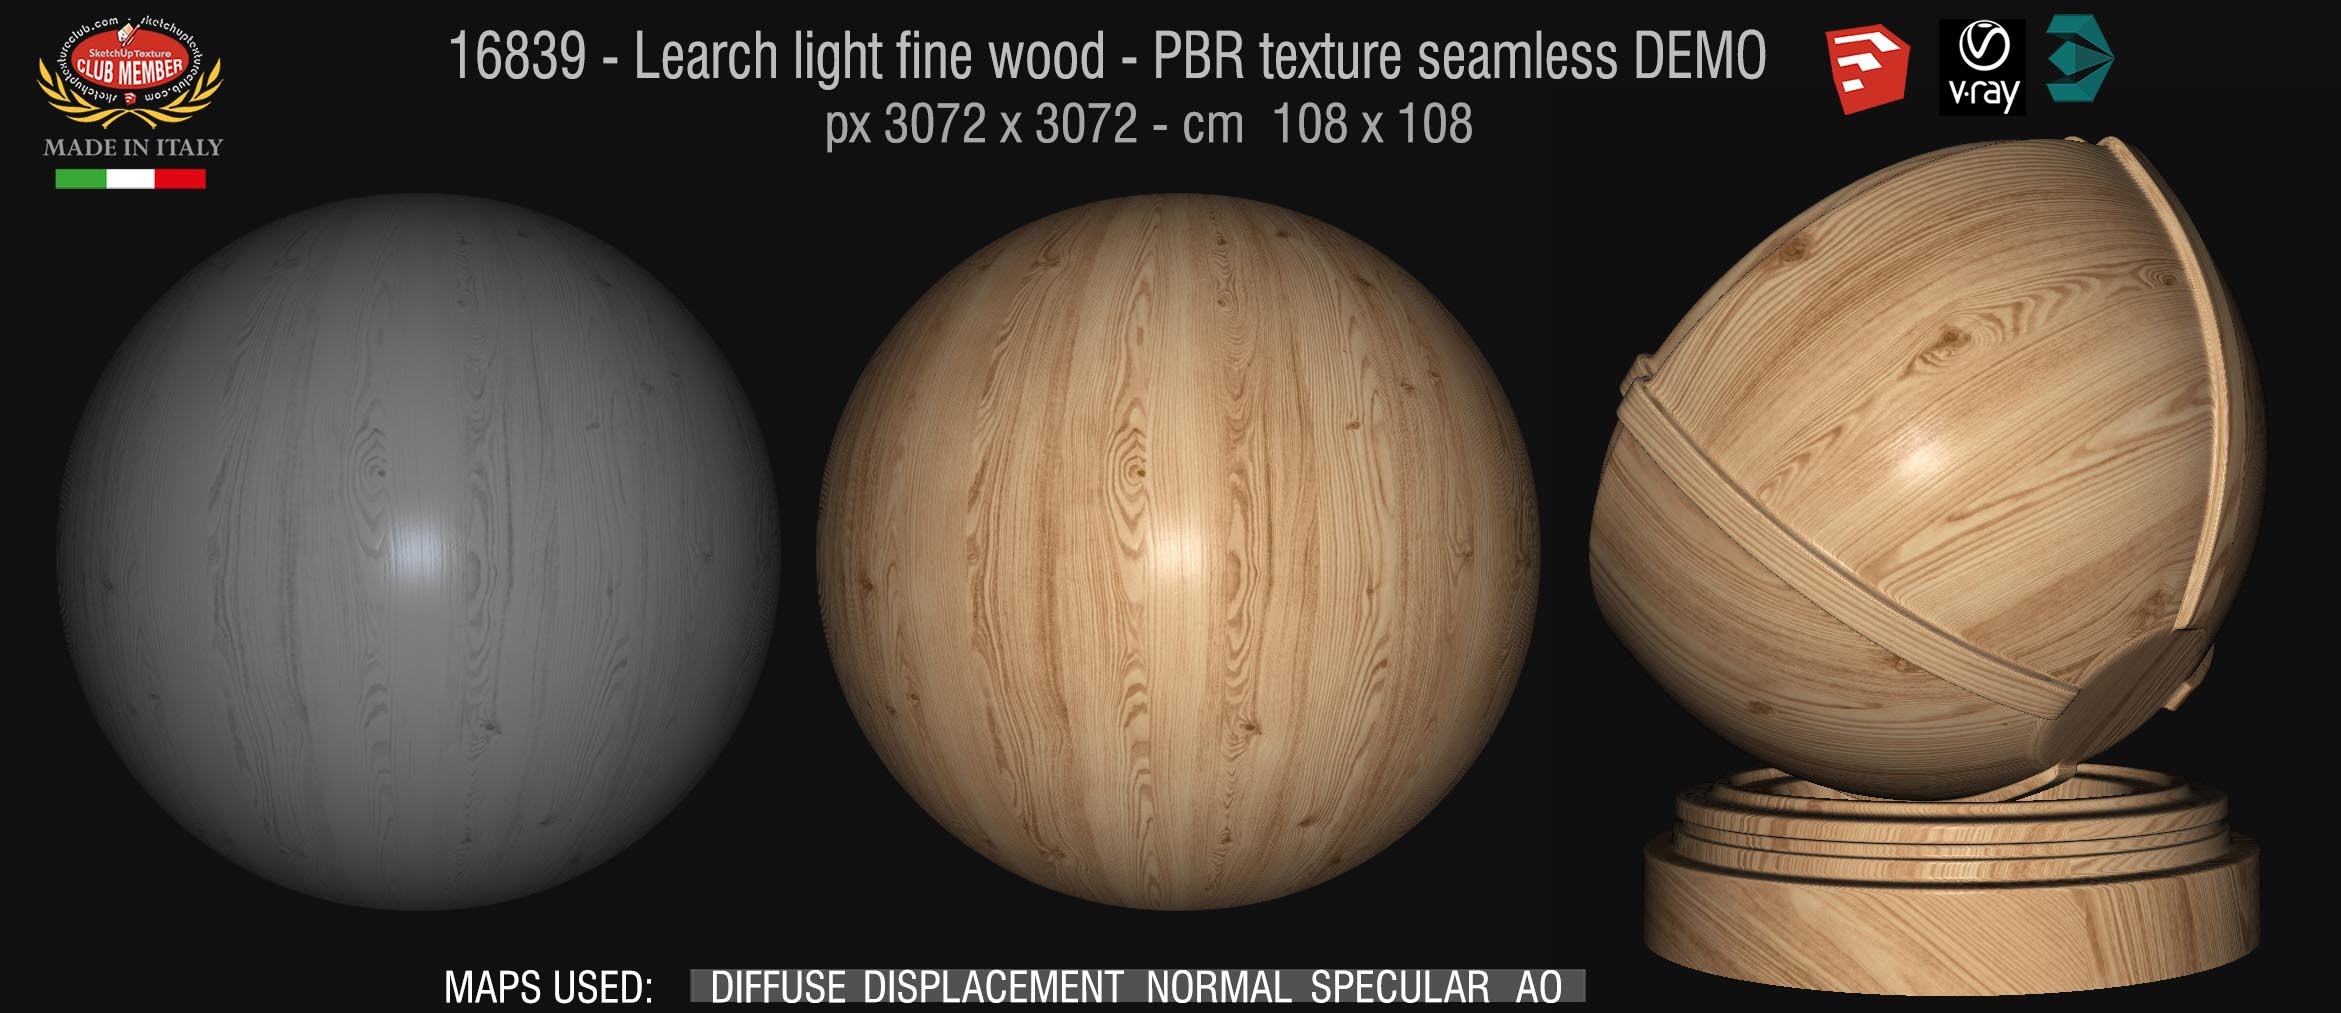 16839 Learch light fine wood - PBR texture seamless DEMO